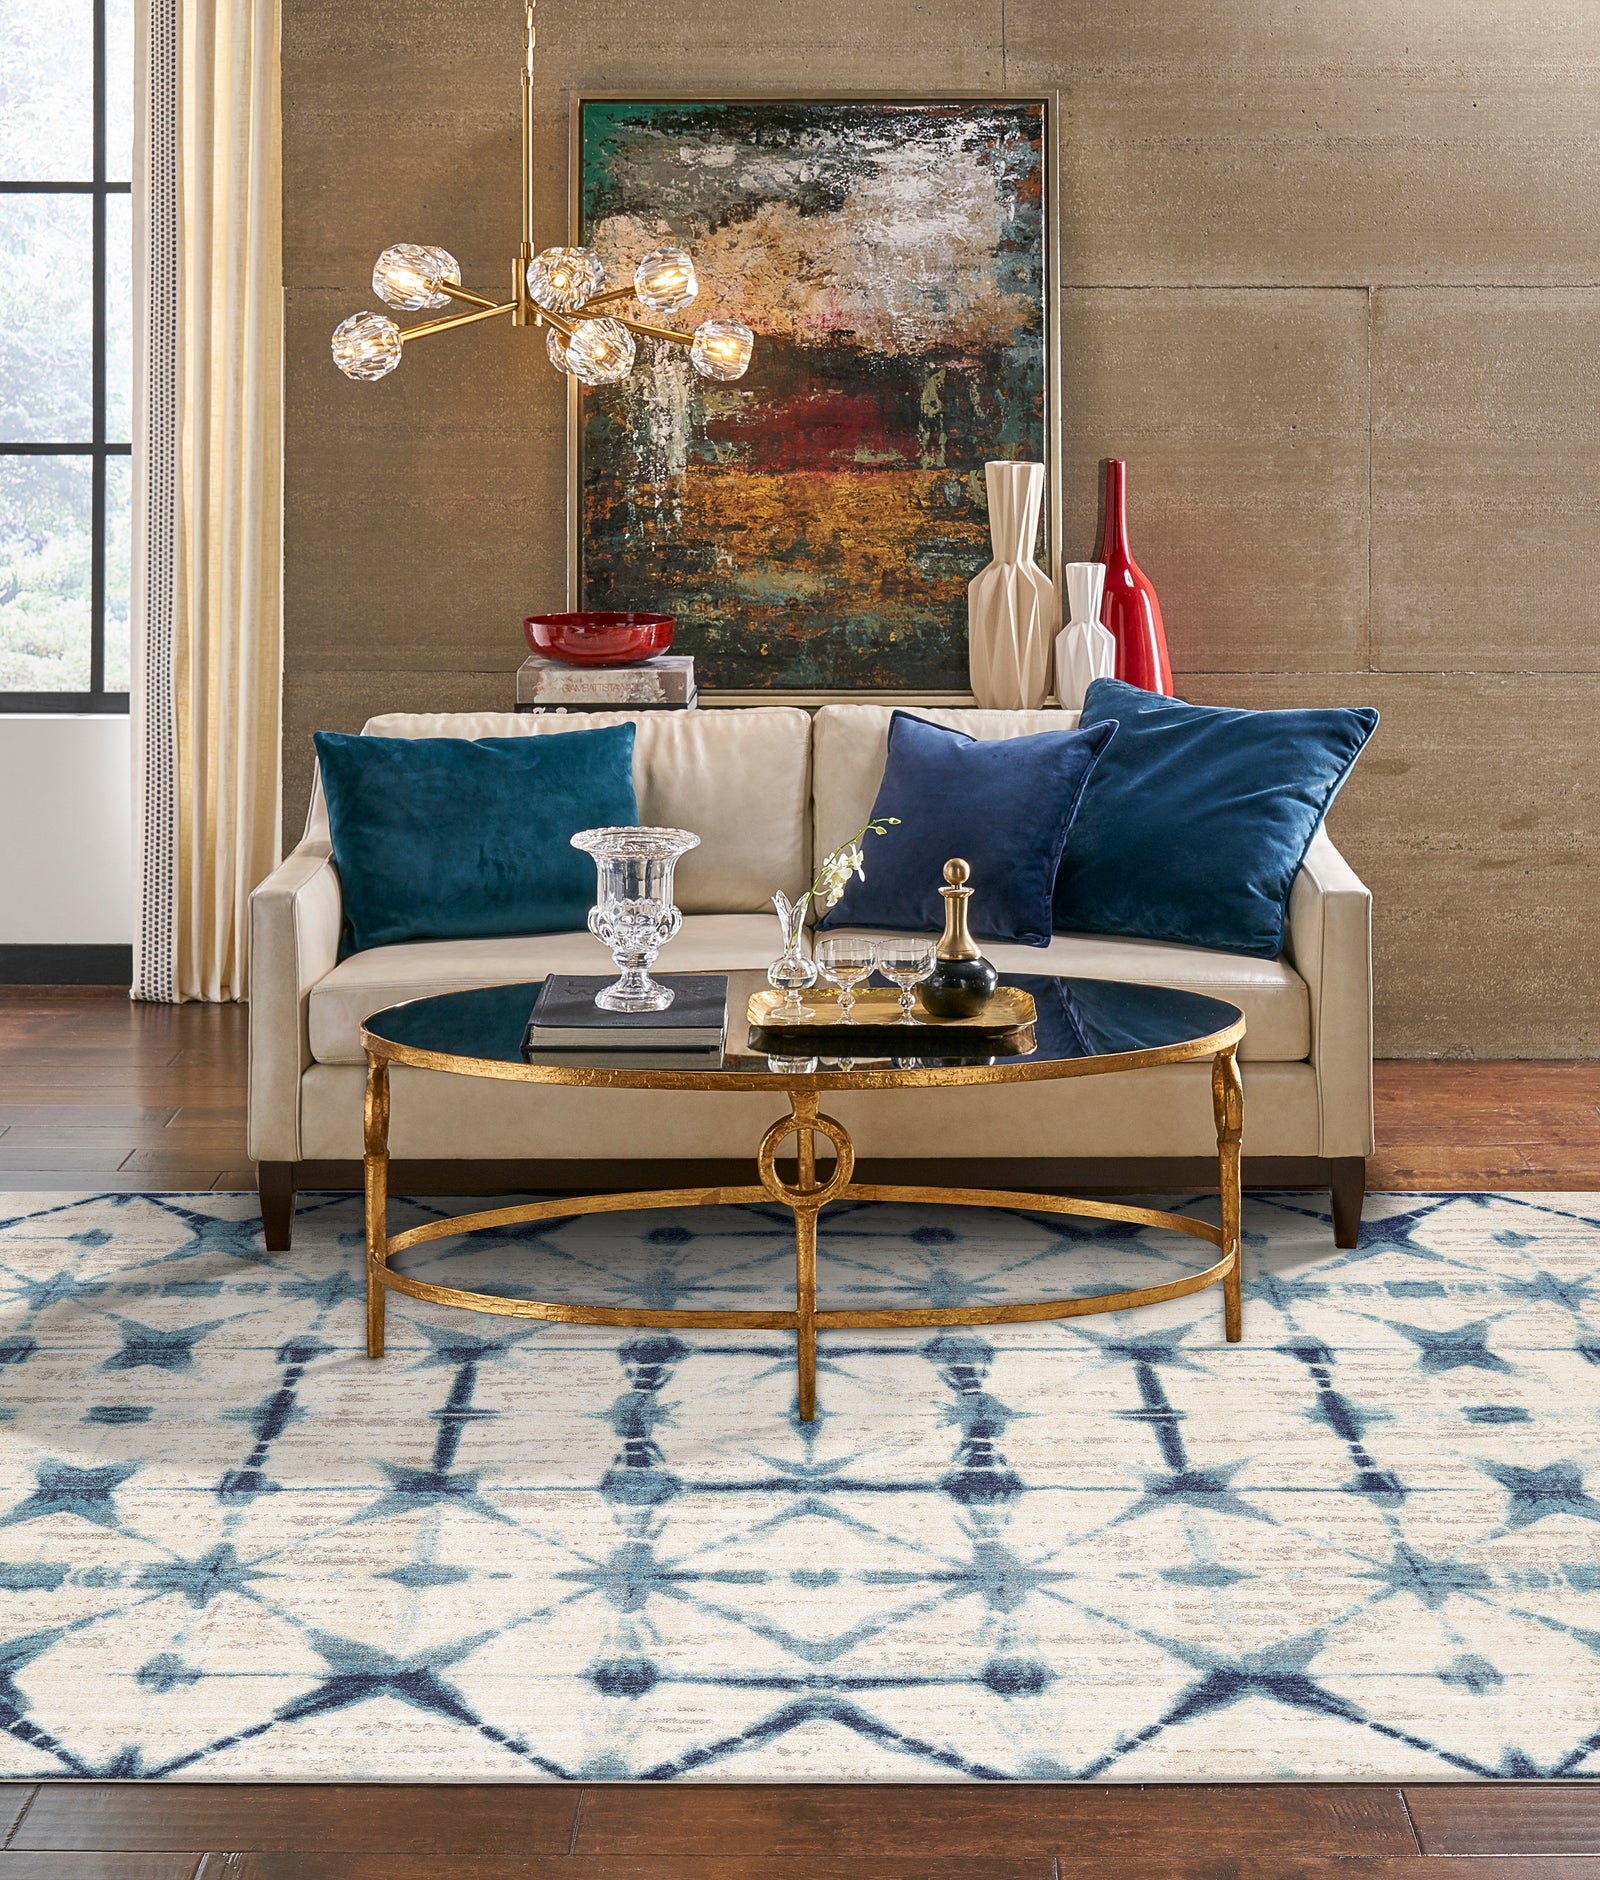 Top 7 Area Rug Tips - Decorating With Rugs Tips - NW Rugs & Furniture